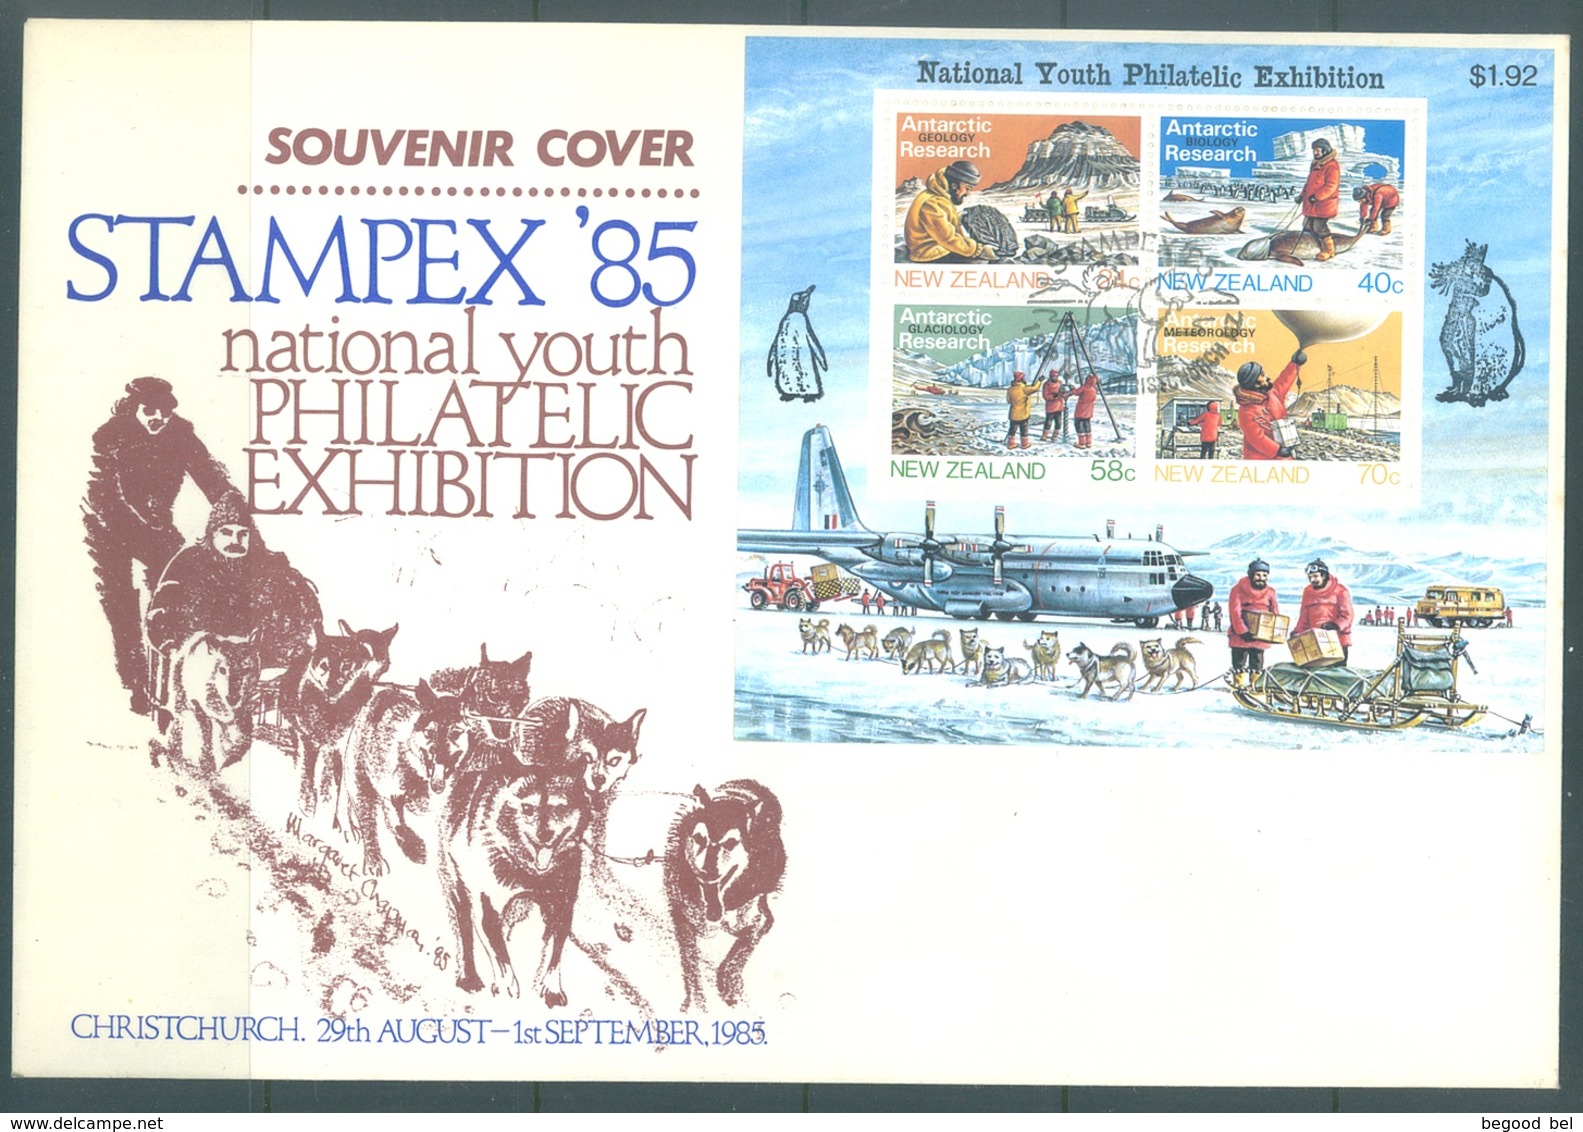 NEW ZEALAND - 1.9.1985 - SOUVENIR COVER STAMPEX 85  - ANTARCTIC RESEARCH - Yv BLOC 49 - Lot 18964 - Lettres & Documents